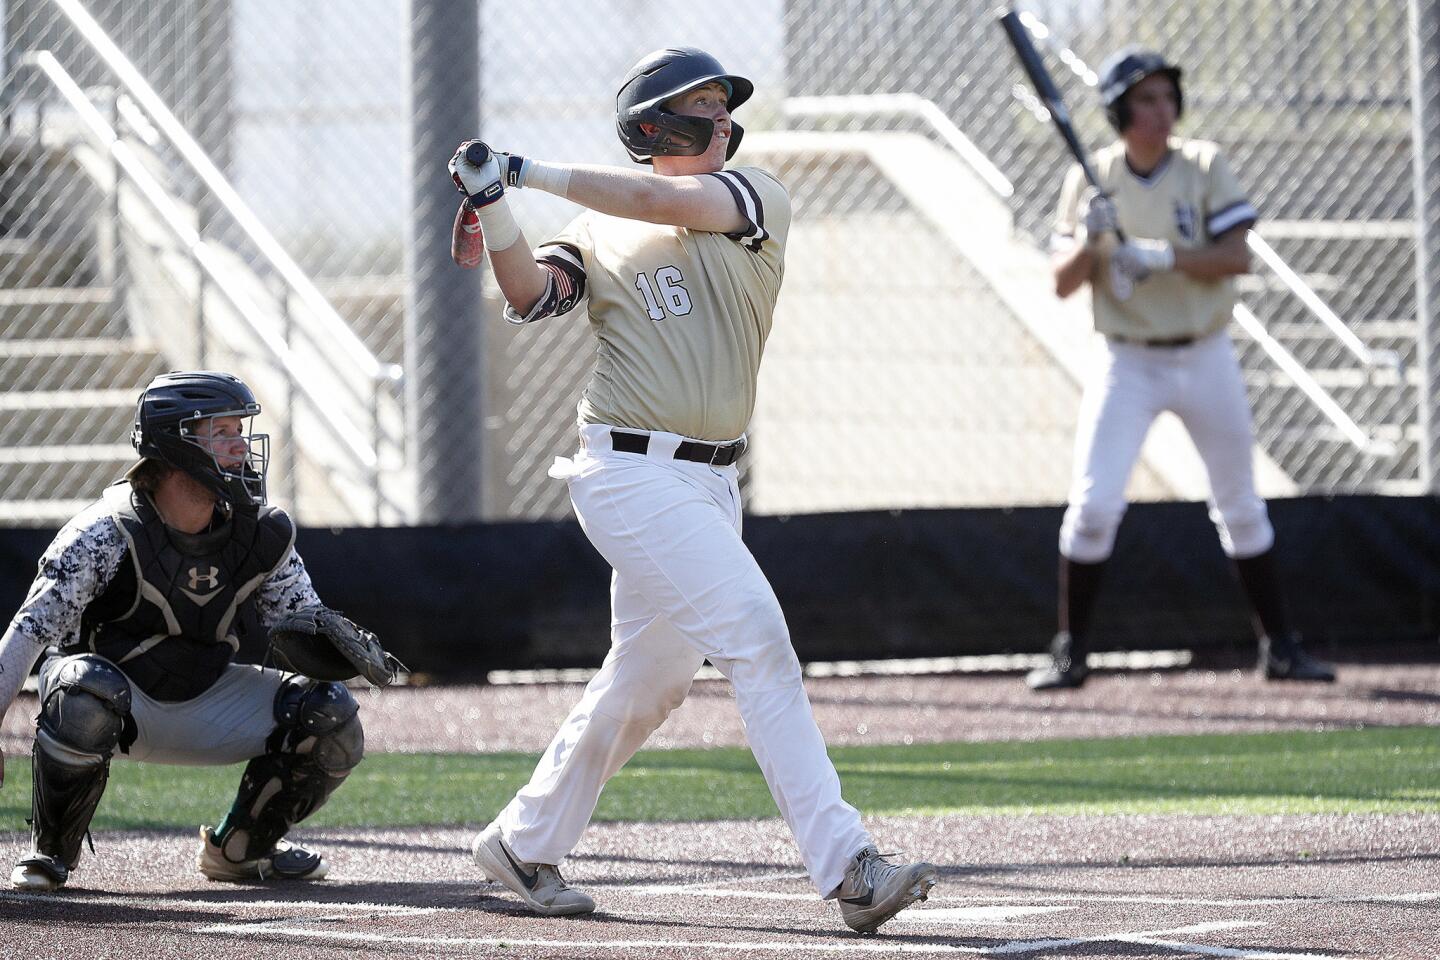 St. Francis' Brendan Durfee watches a high hit ball to deep center field that drops for a triple against Canyon Country in a Valley Invitational Baseball League game at the Glendale Sports Complex on Tuesday, July 3, 2019.